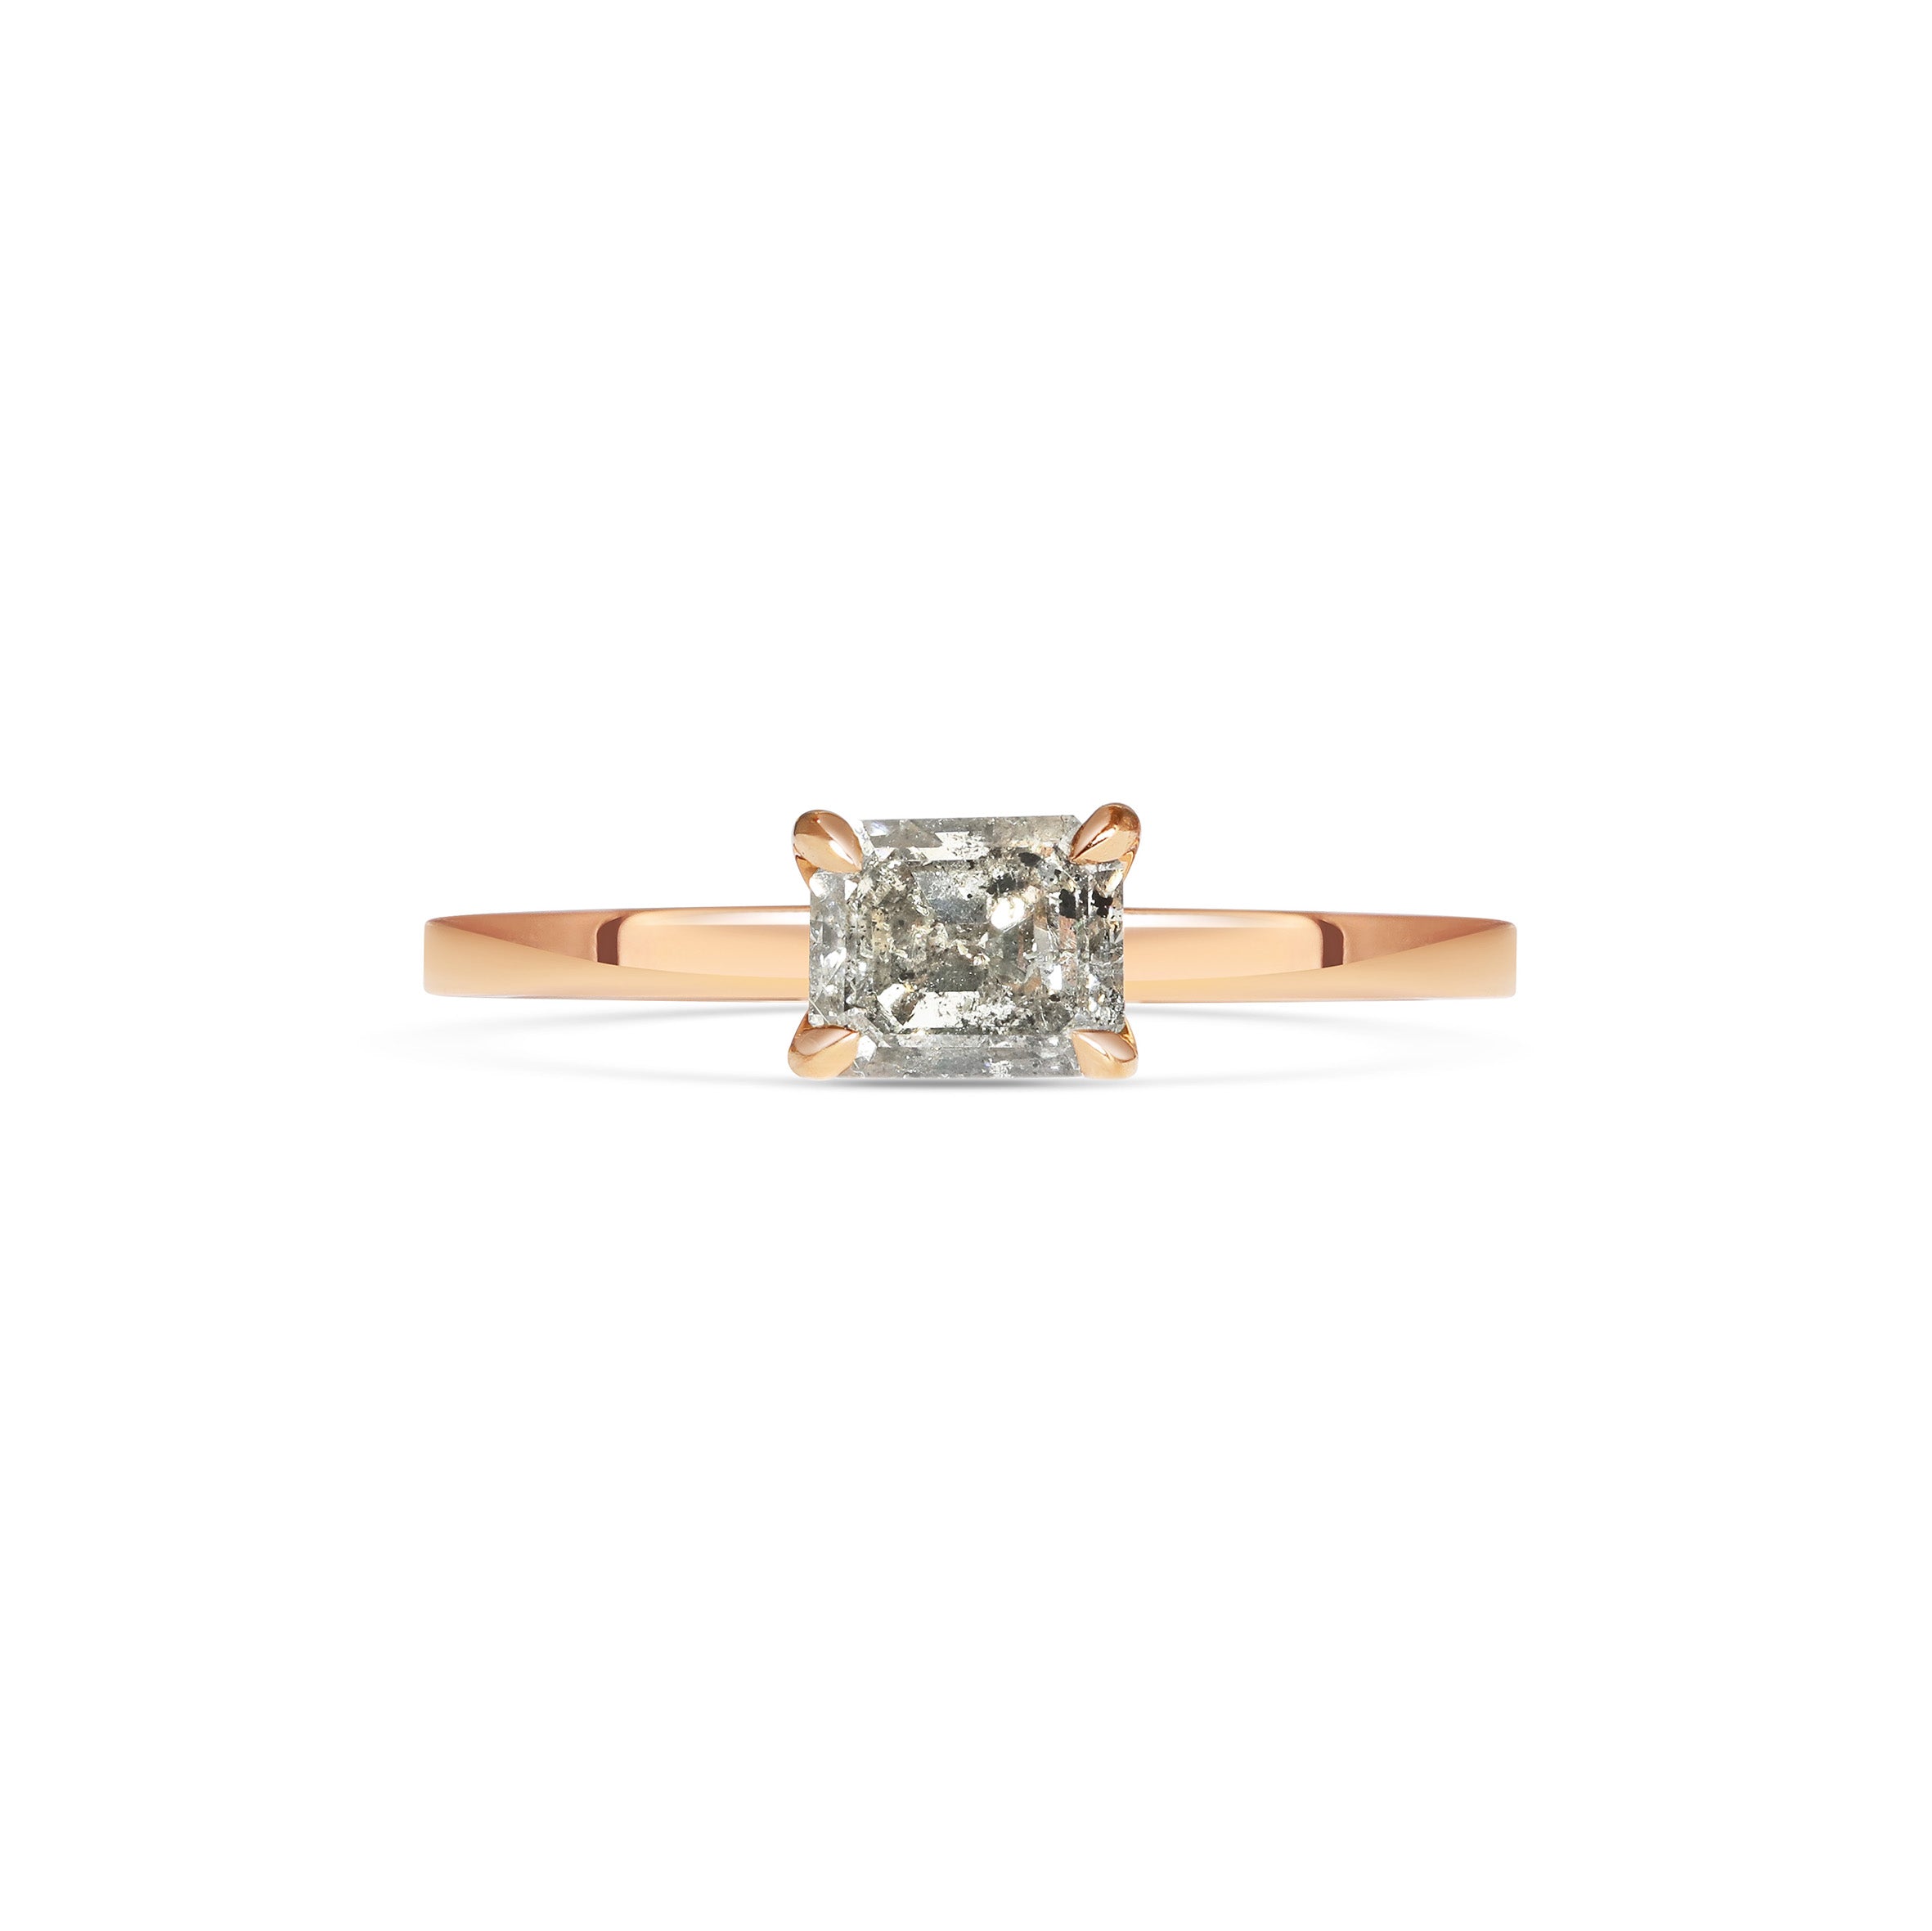 The Contra Ring - 0.73ct Grey by East London jeweller Rachel Boston | Discover our collections of unique and timeless engagement rings, wedding rings, and modern fine jewellery.